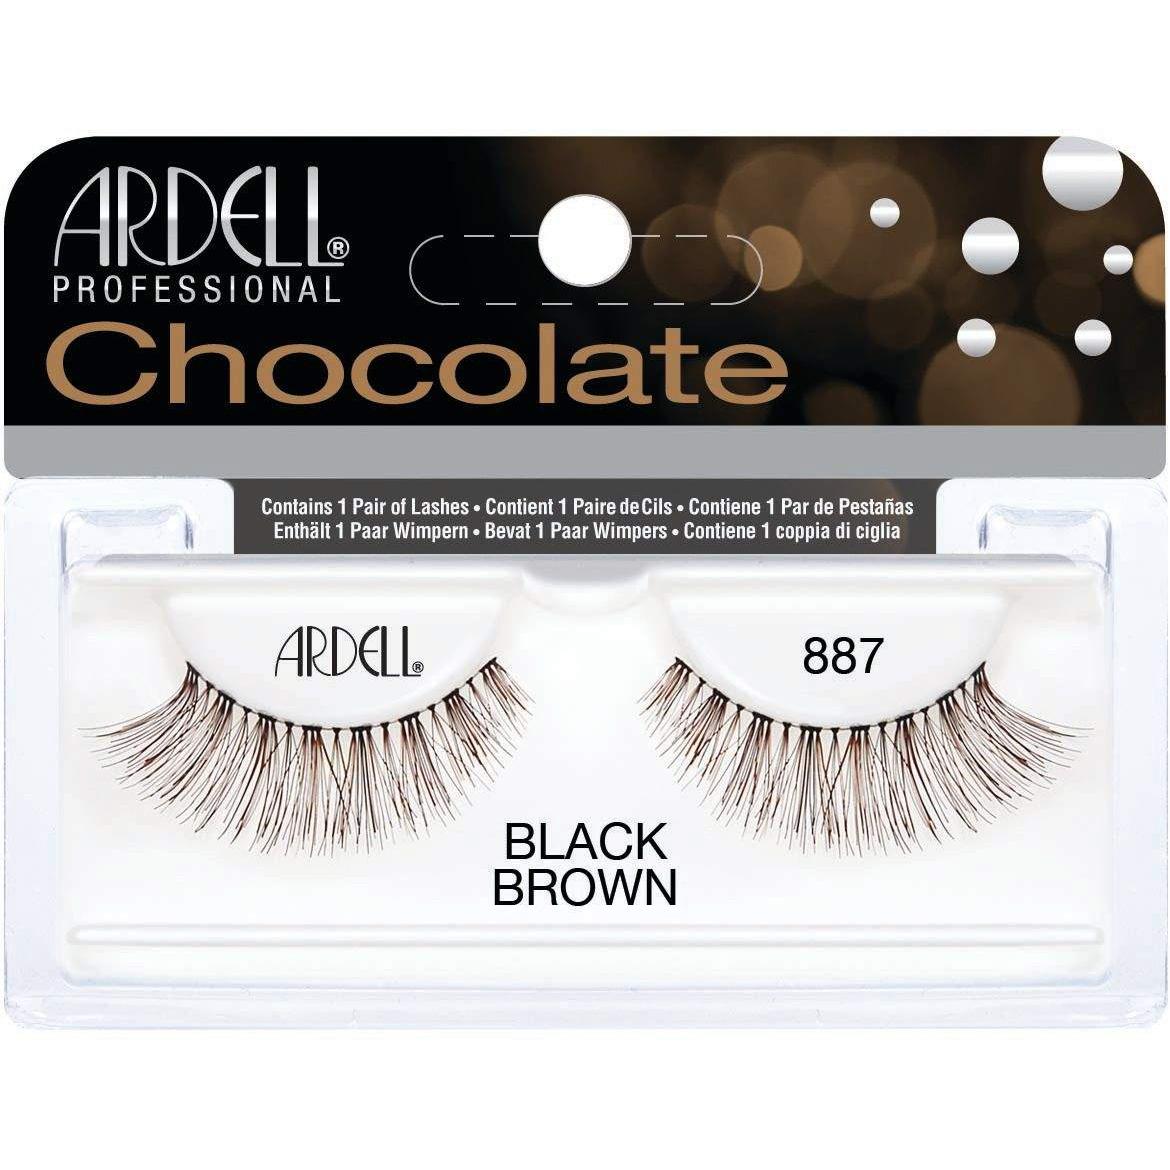 Ardell Chocolate 887-Ardell-ARD_Natural,Brand_Ardell,Collection_Makeup,Makeup_Eye,Makeup_Faux Lashes